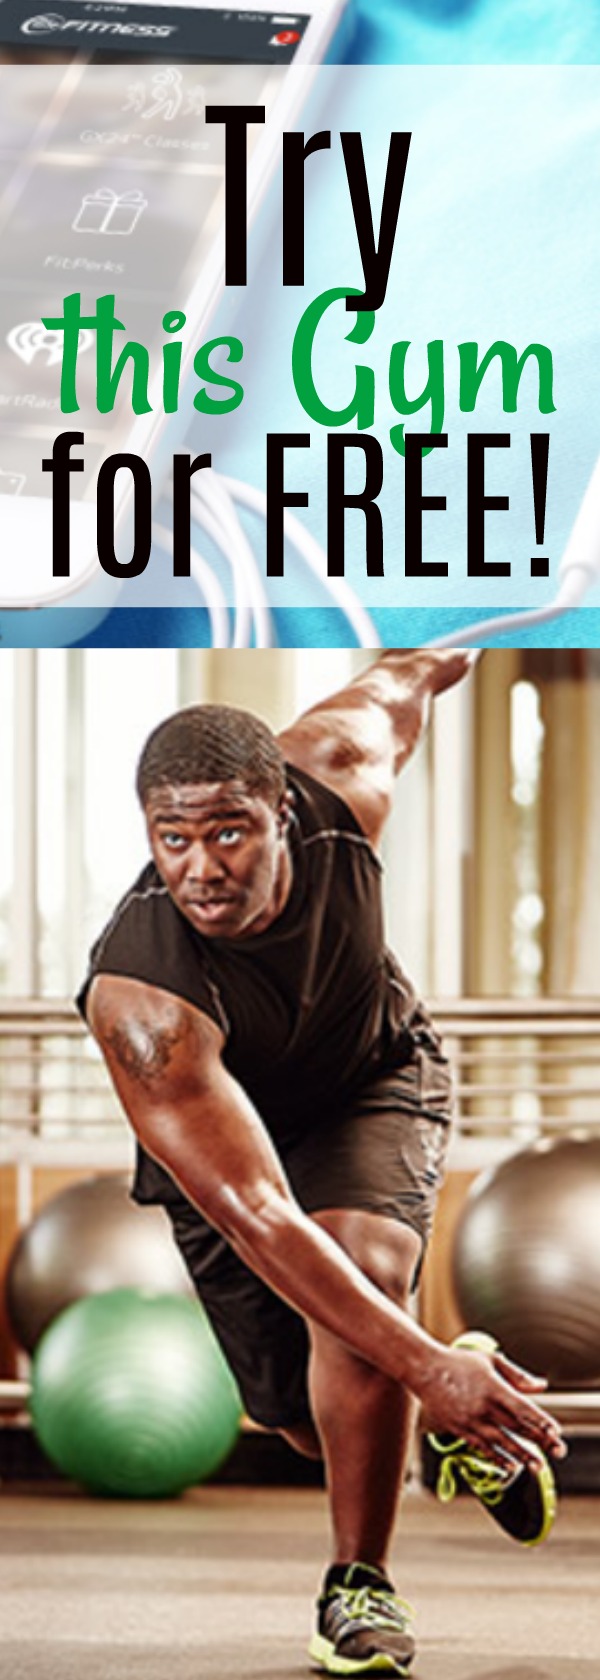 Simple Is 24 Hour Fitness Free for Weight Loss